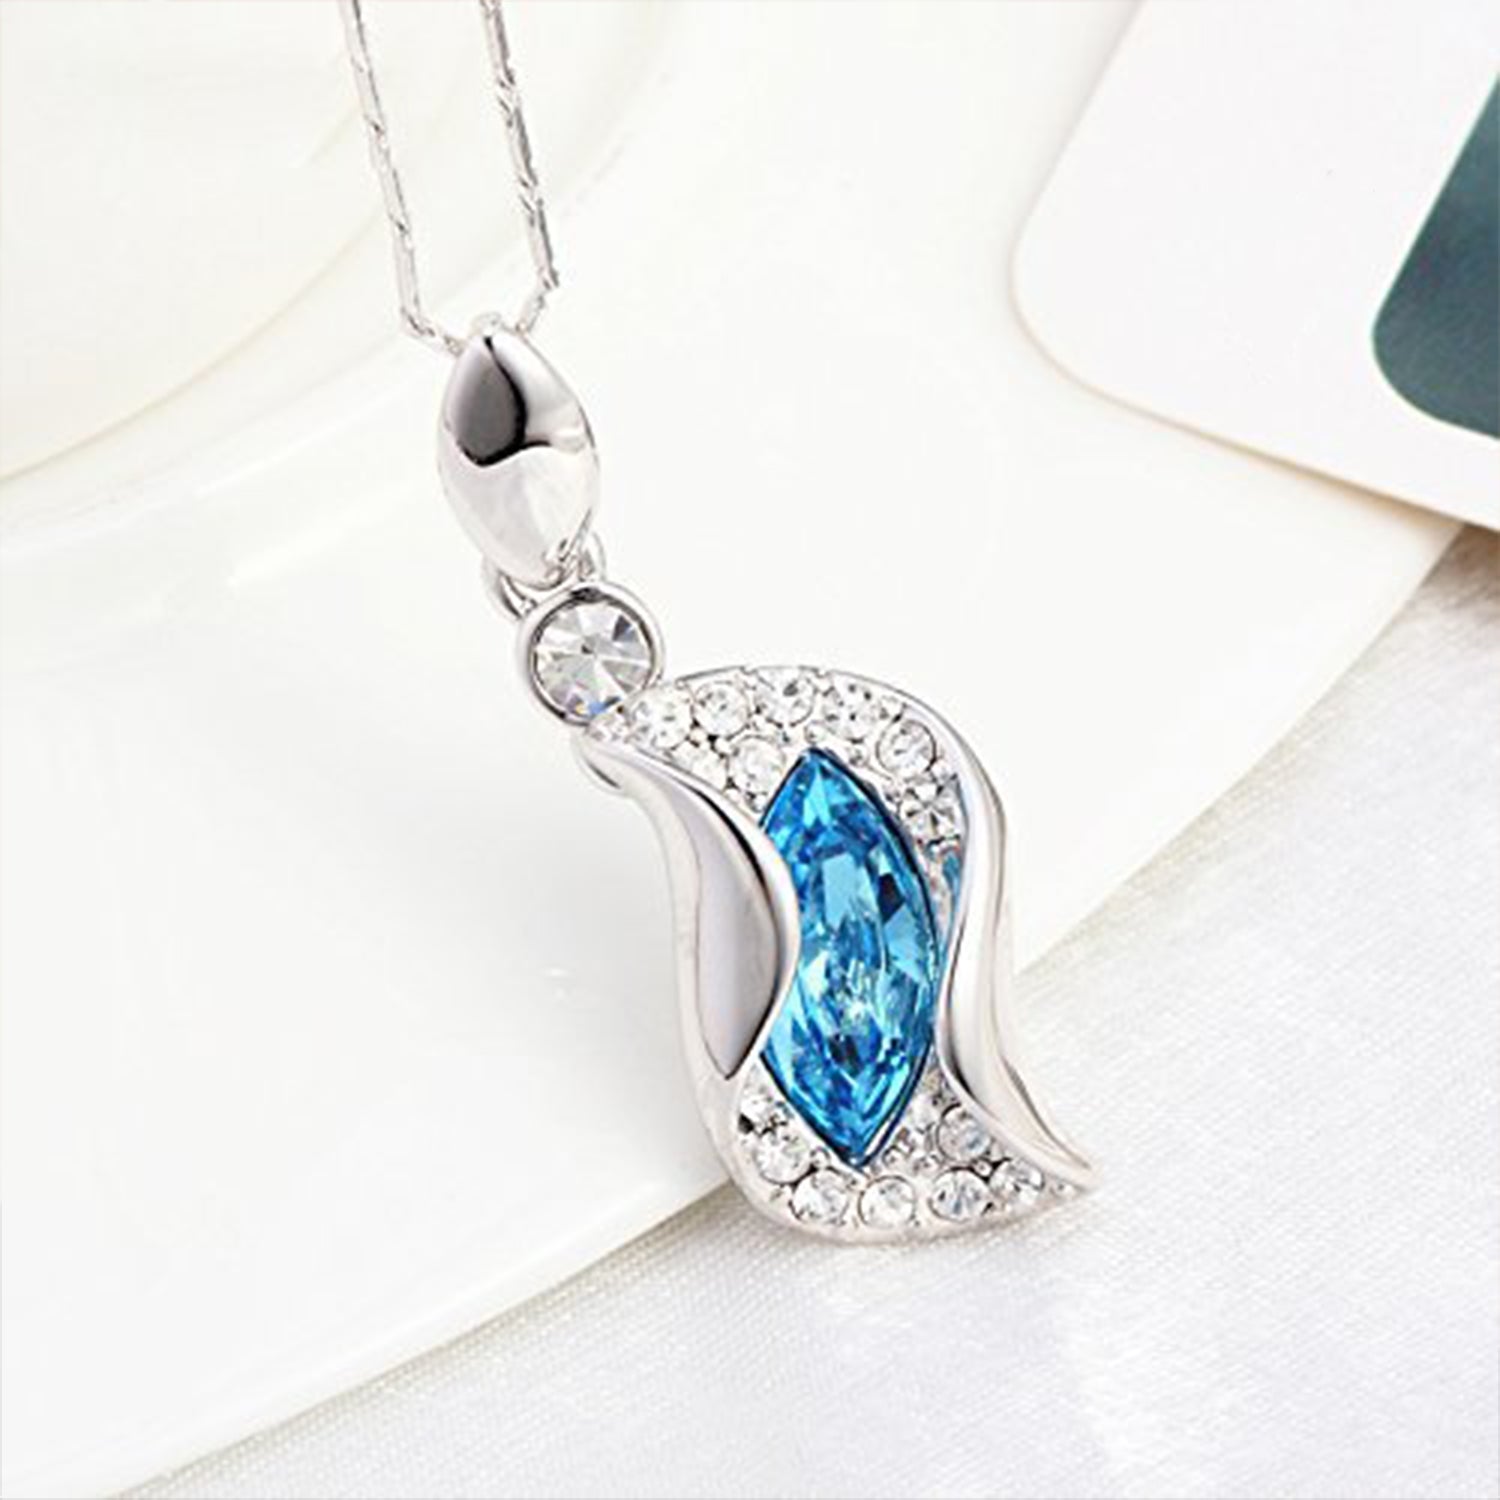 Designer Blue and White Solitaire Crystal Pendant